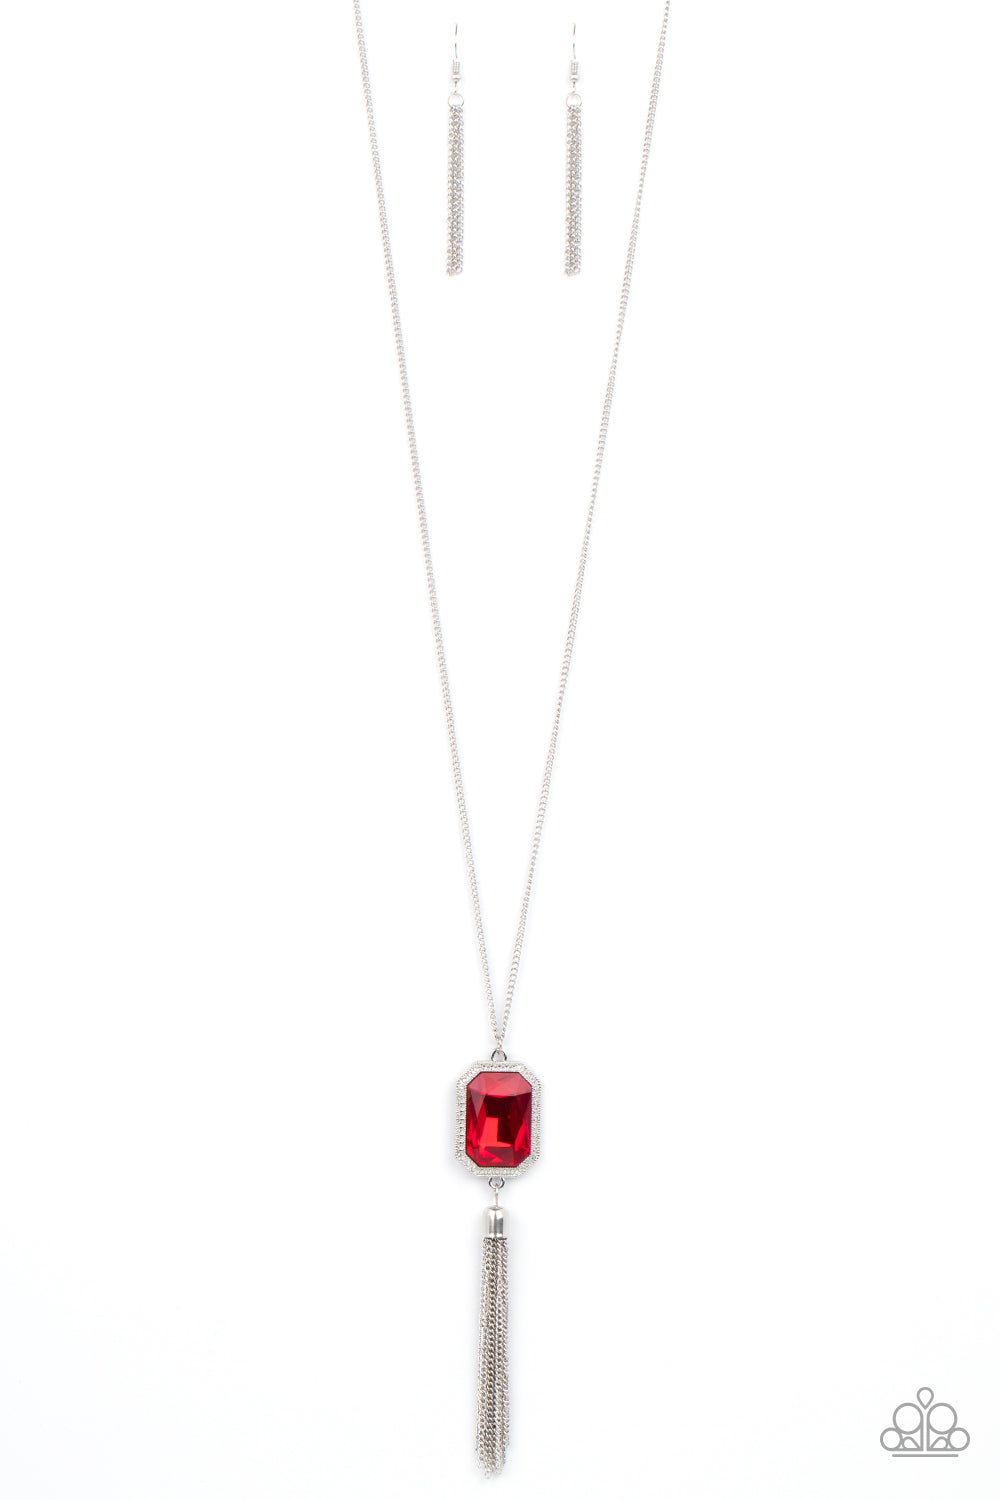 ​Blissed Out Opulence - Red Gem and Silver Necklace - Paparazzi Accessories - An impressive red emerald cut gem is pressed into the center of a silver studded frame, creating an ethereal pop of color at the bottom of a lengthened silver chain. A silver chain tassel swings from the bottom of the pendant, adding flirtatious movement to the opulent display. Features an adjustable clasp closure.